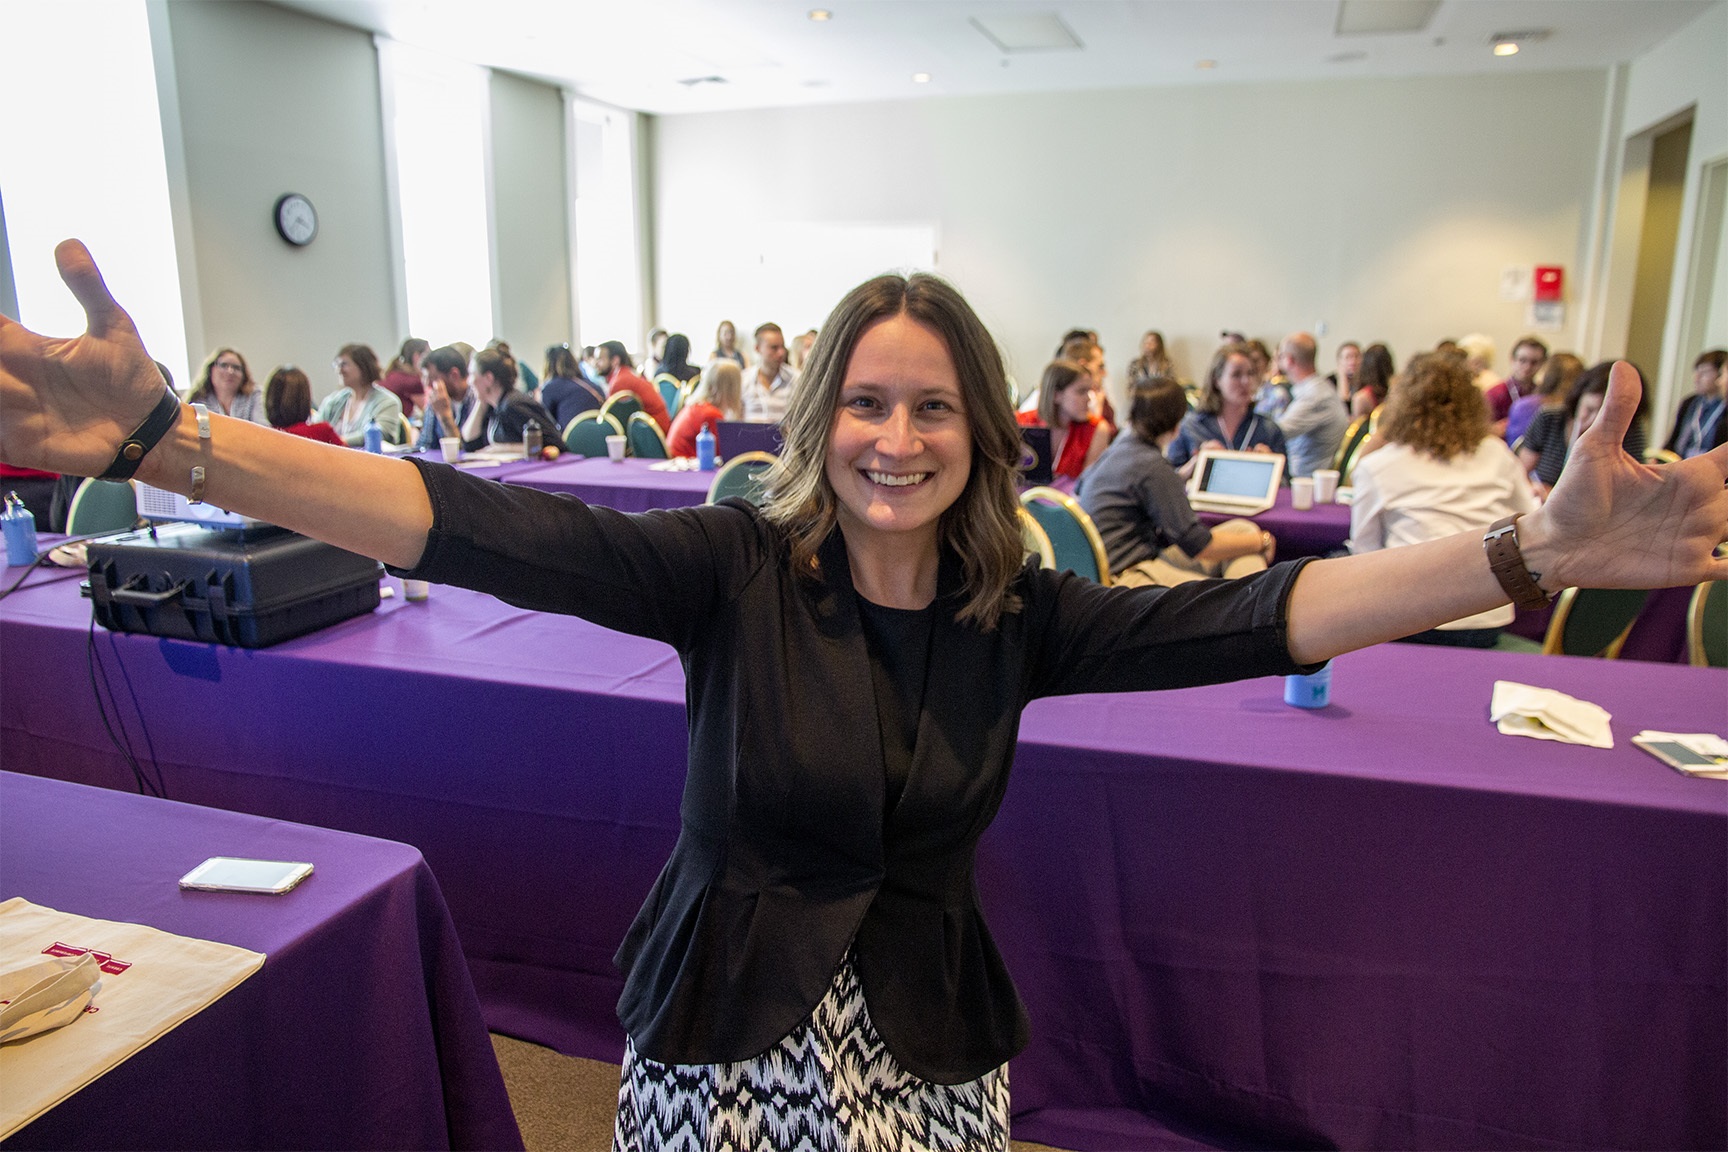 A woman leading a meeting smiles and extends her arms to the camera in front of the room full of meeting participants